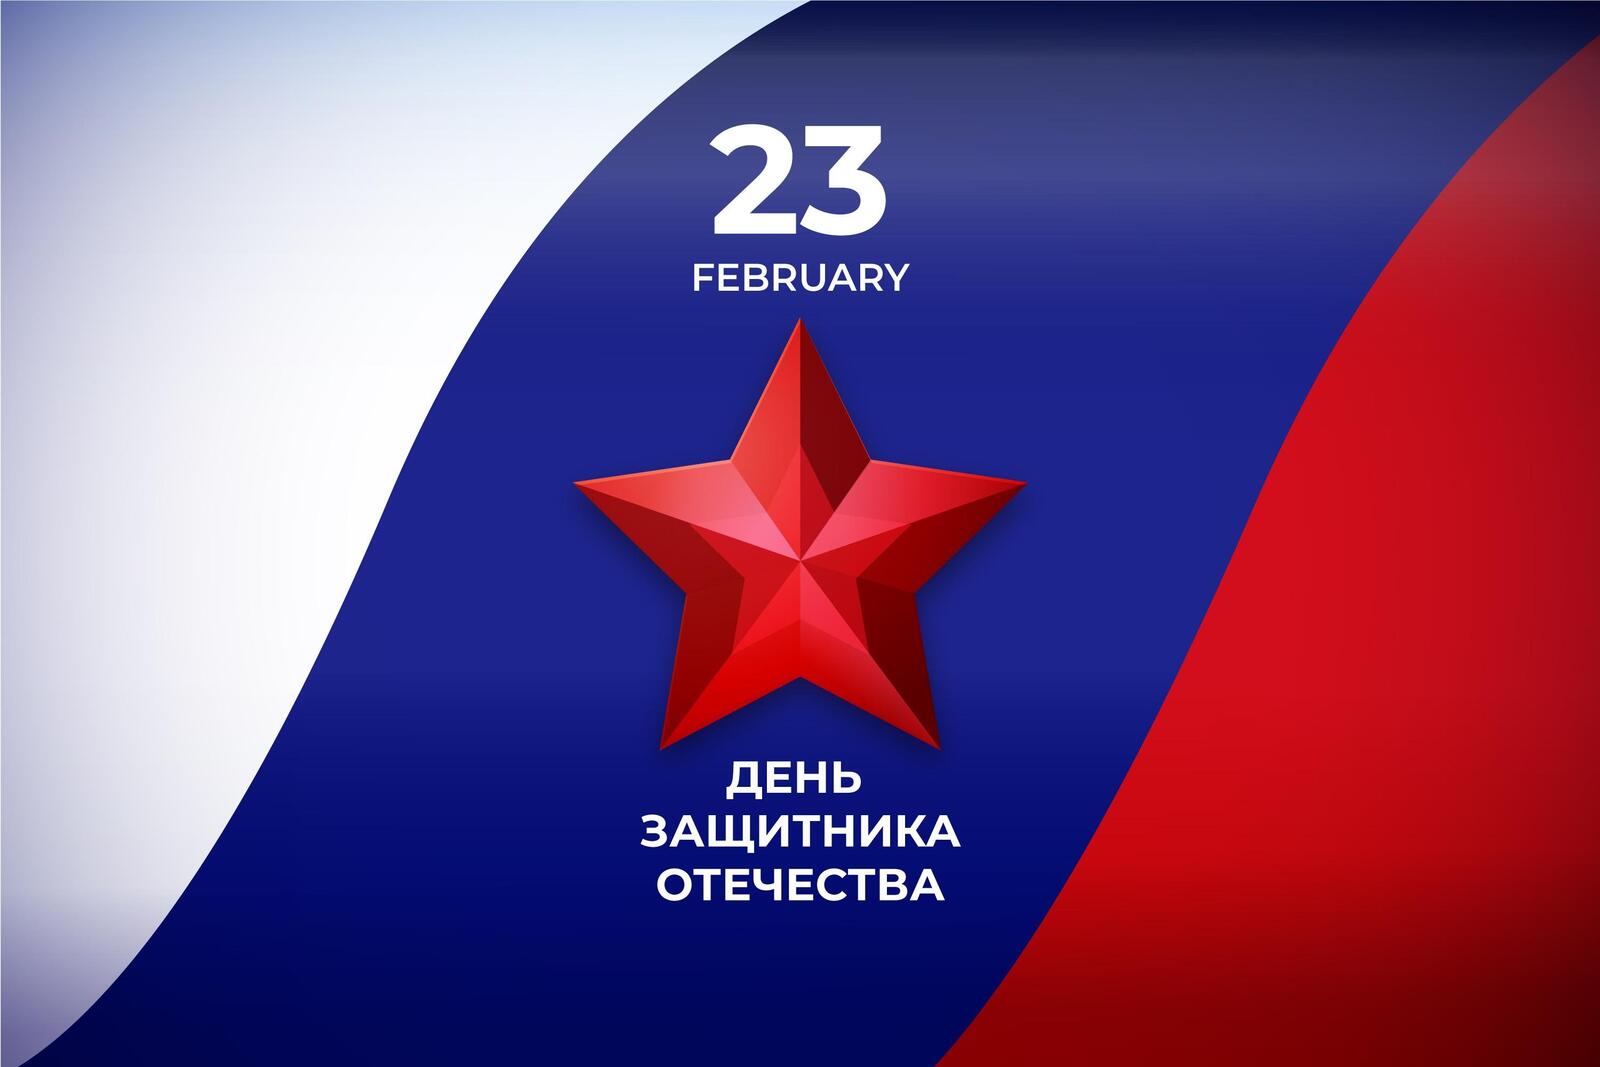 Free photo February 23 against the background of the Russian flag